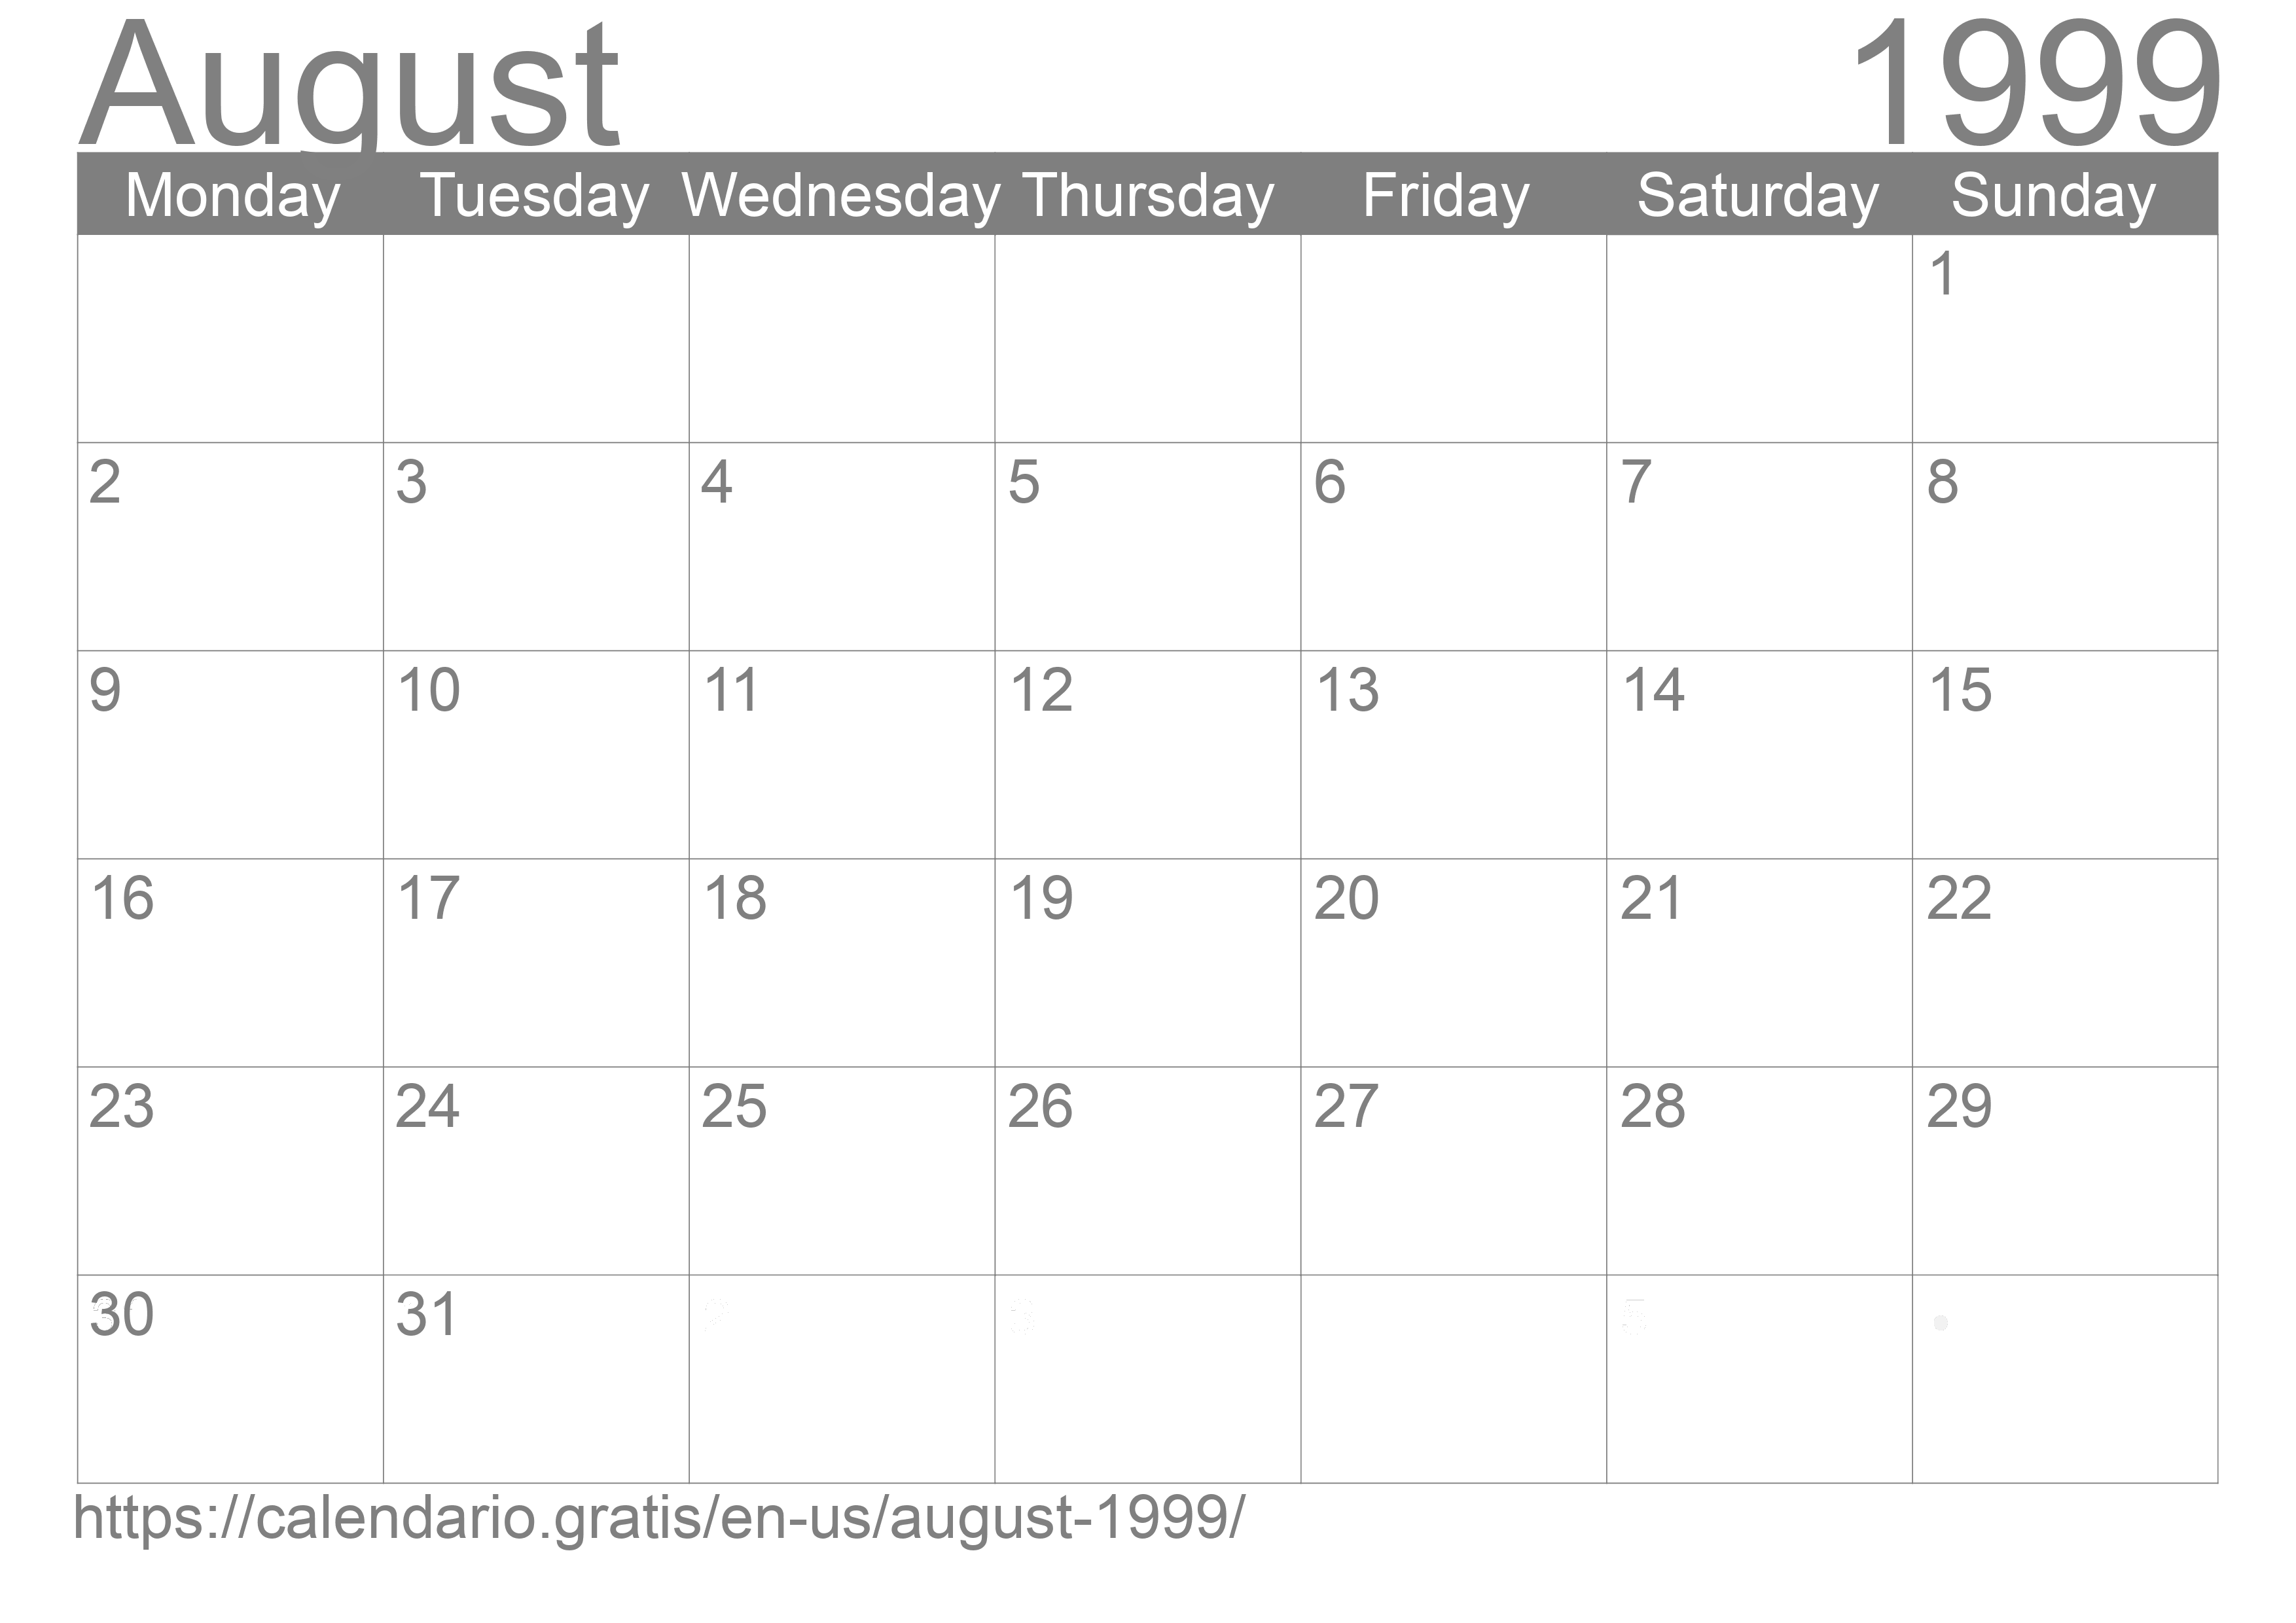 Calendar August 1999 from United States of America in English ☑️